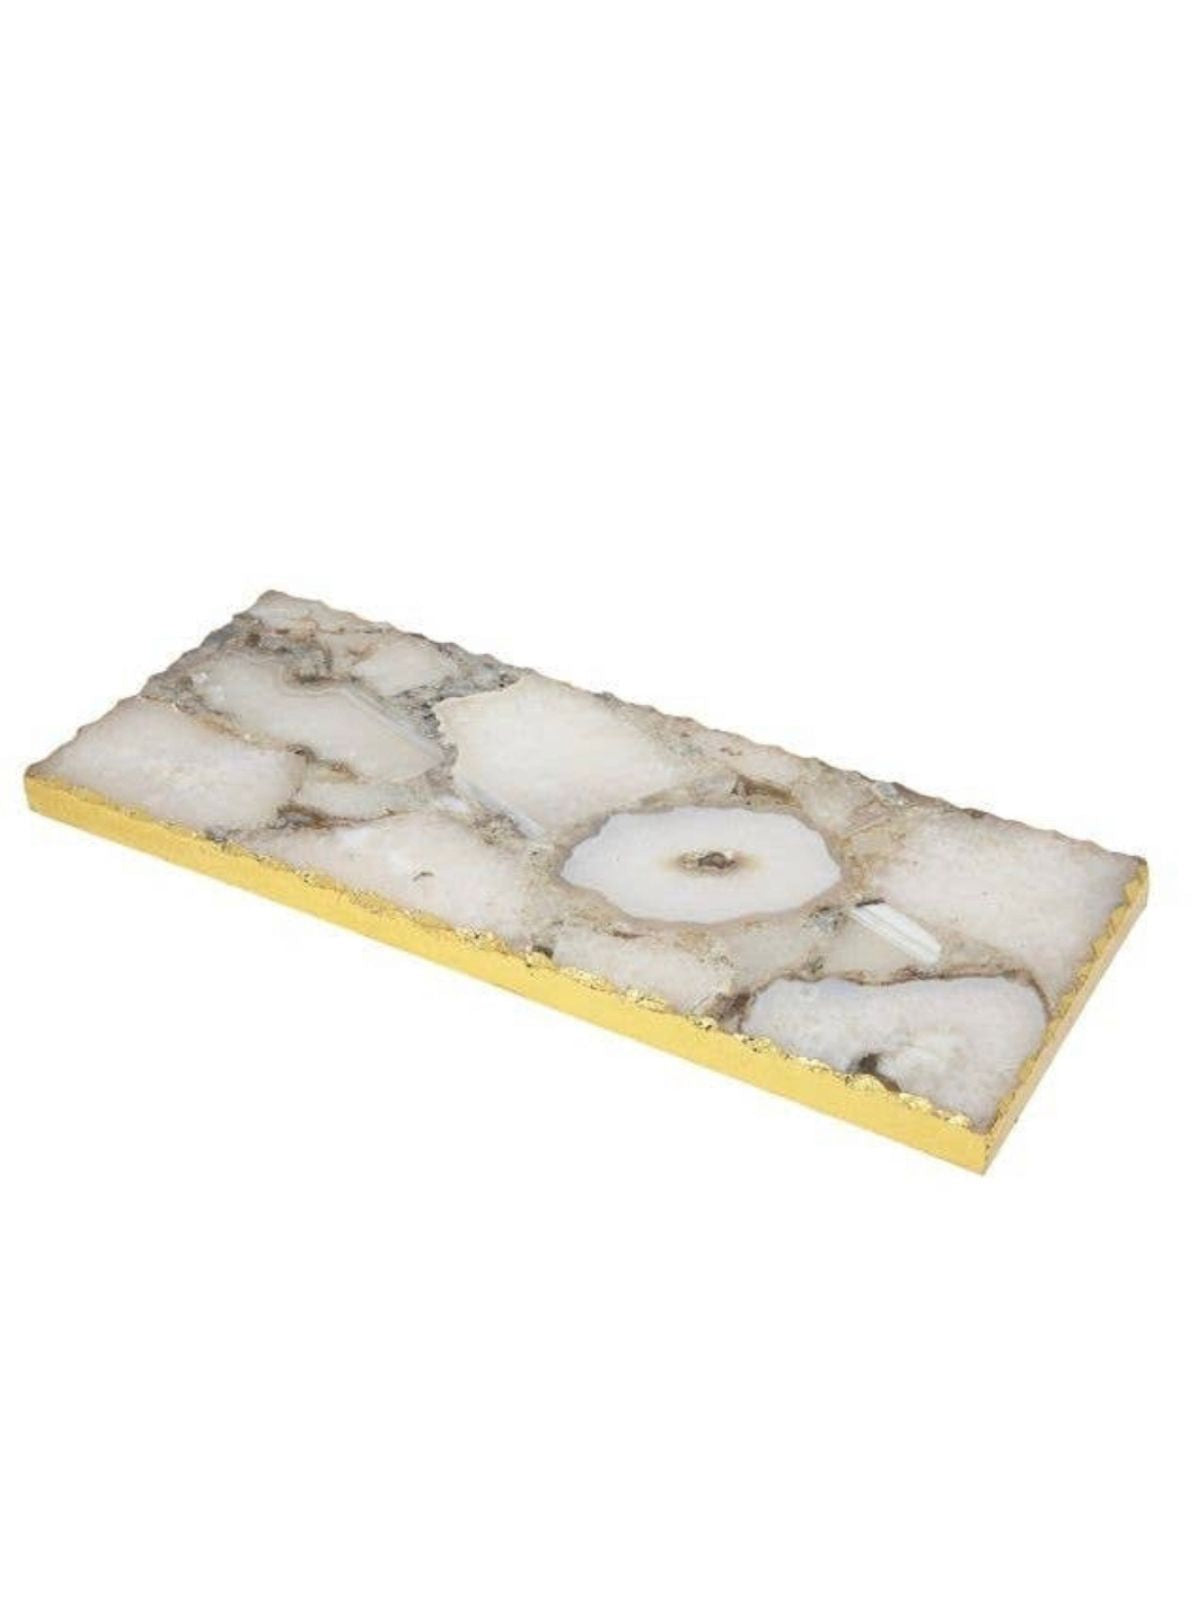 Natural Agate Stone Tray with Gold Edges, 16.5L x 6W.